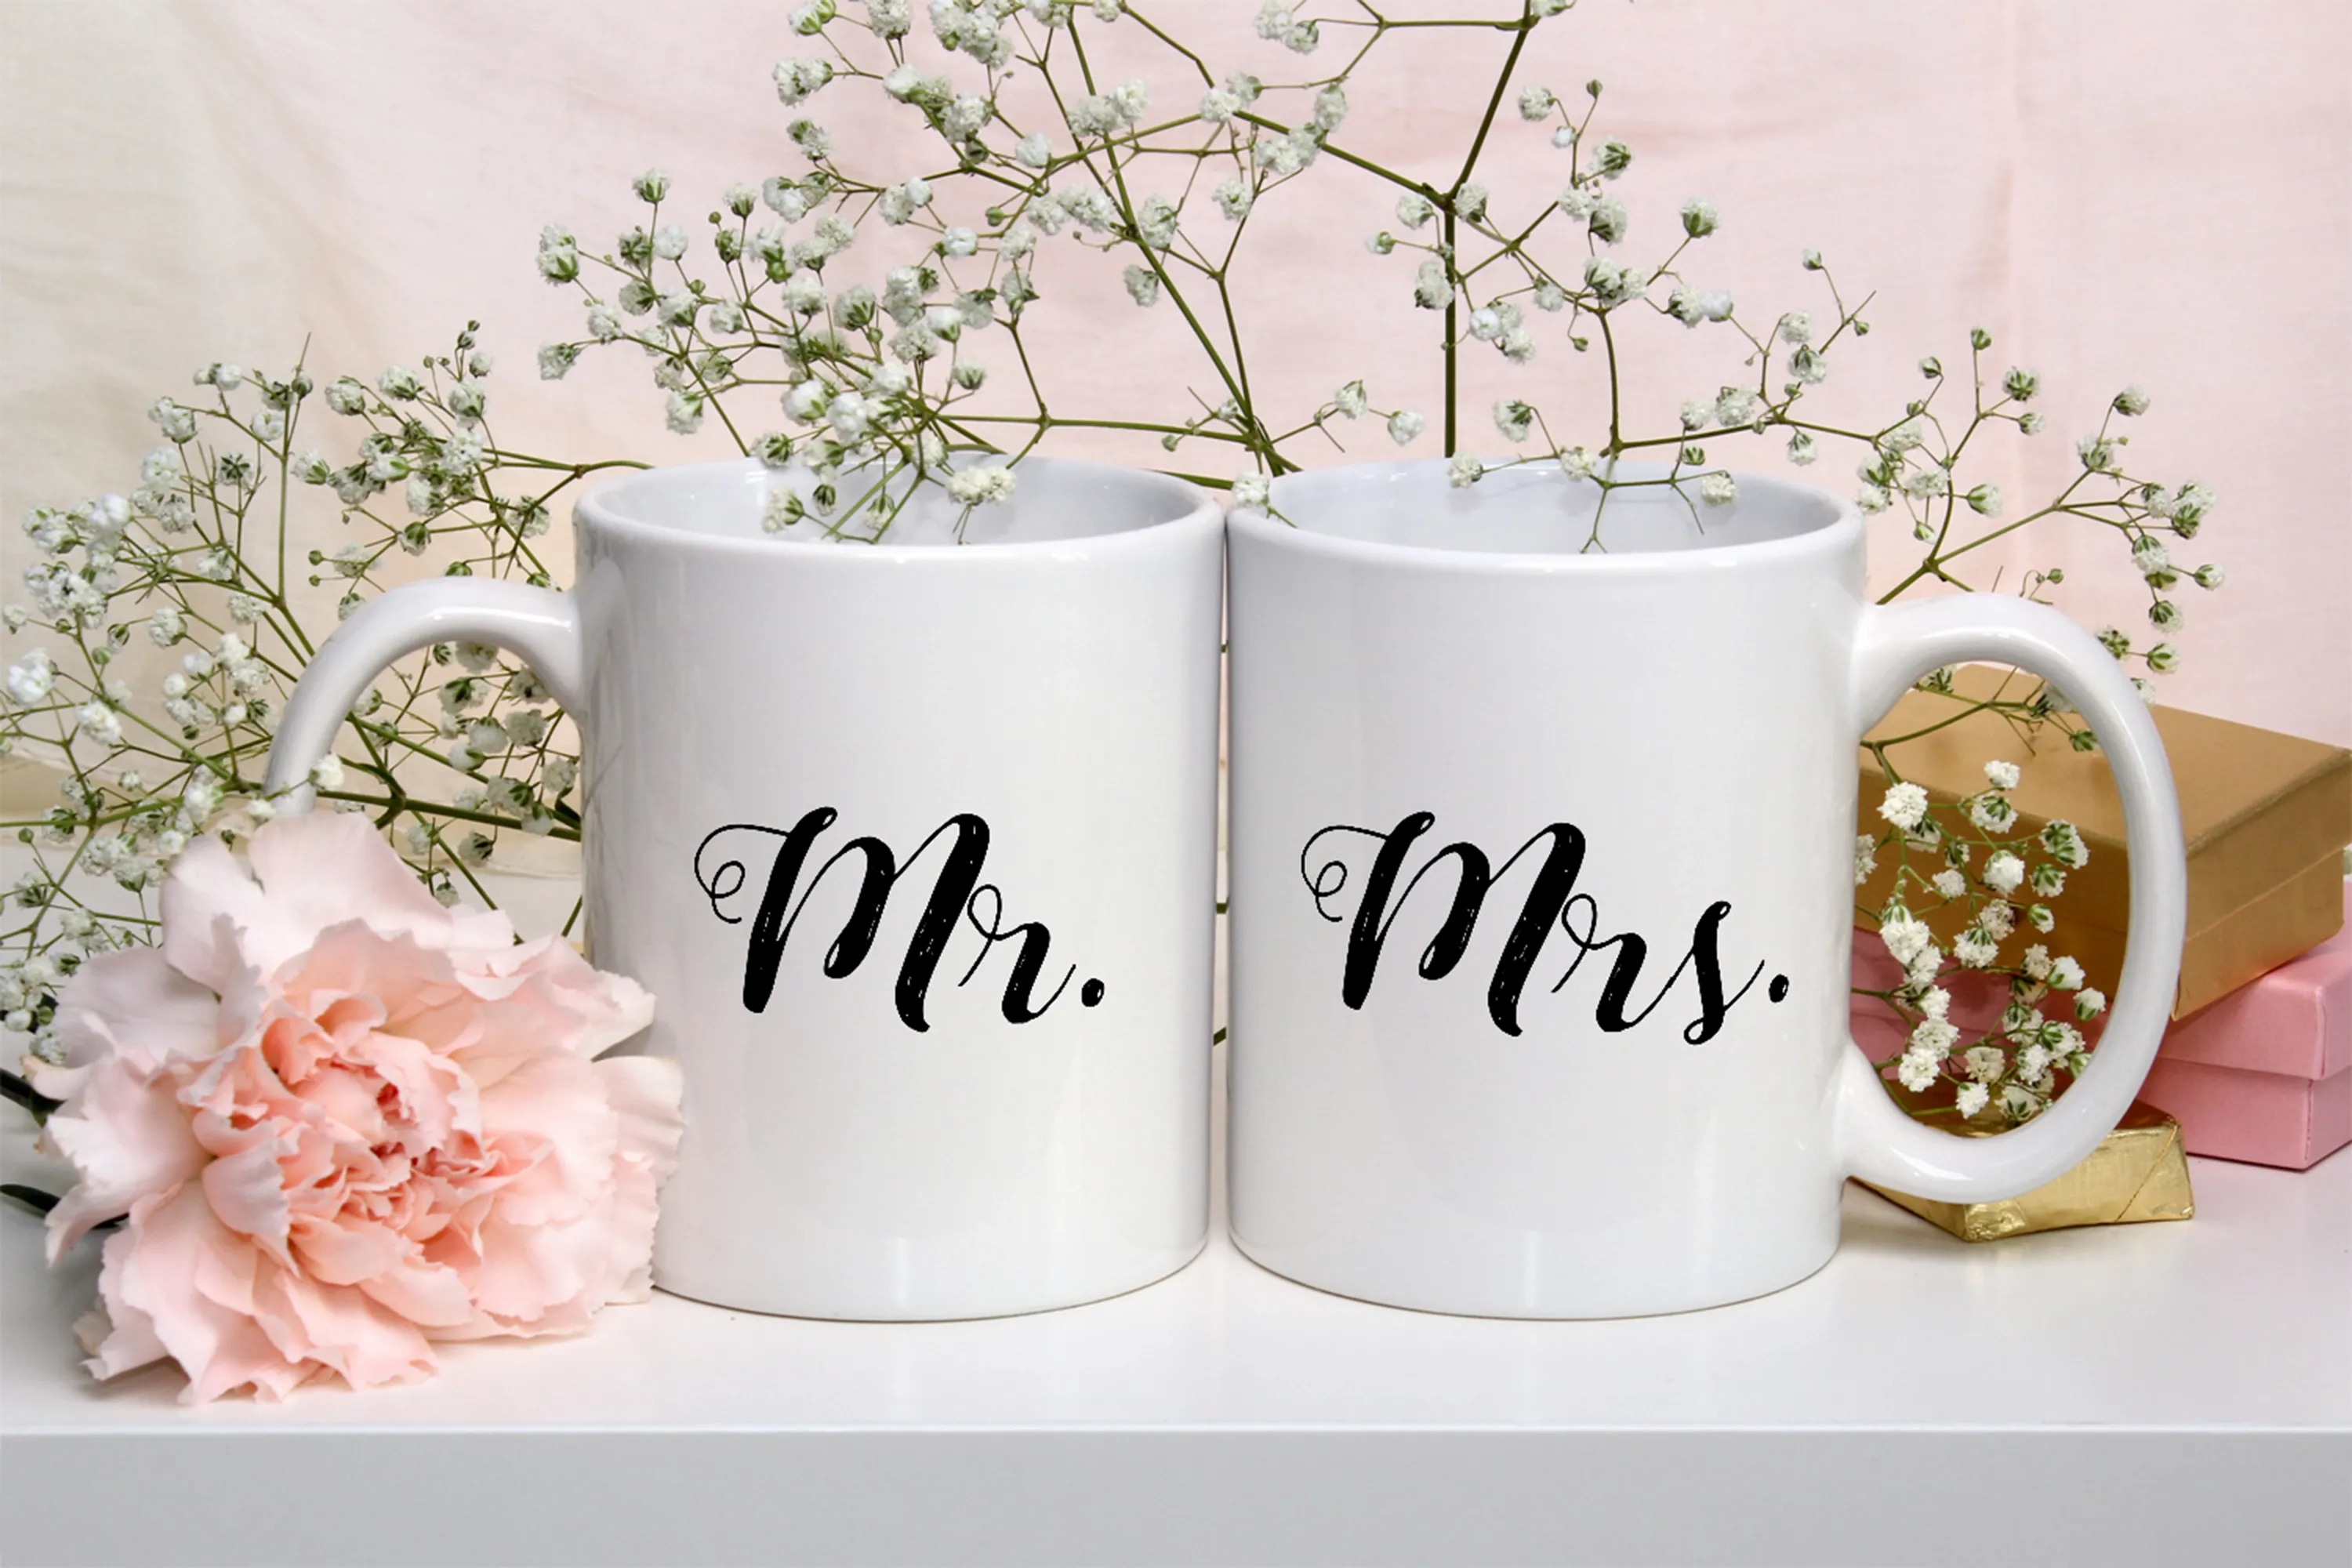 Mockup of two white coffee mugs with flowers